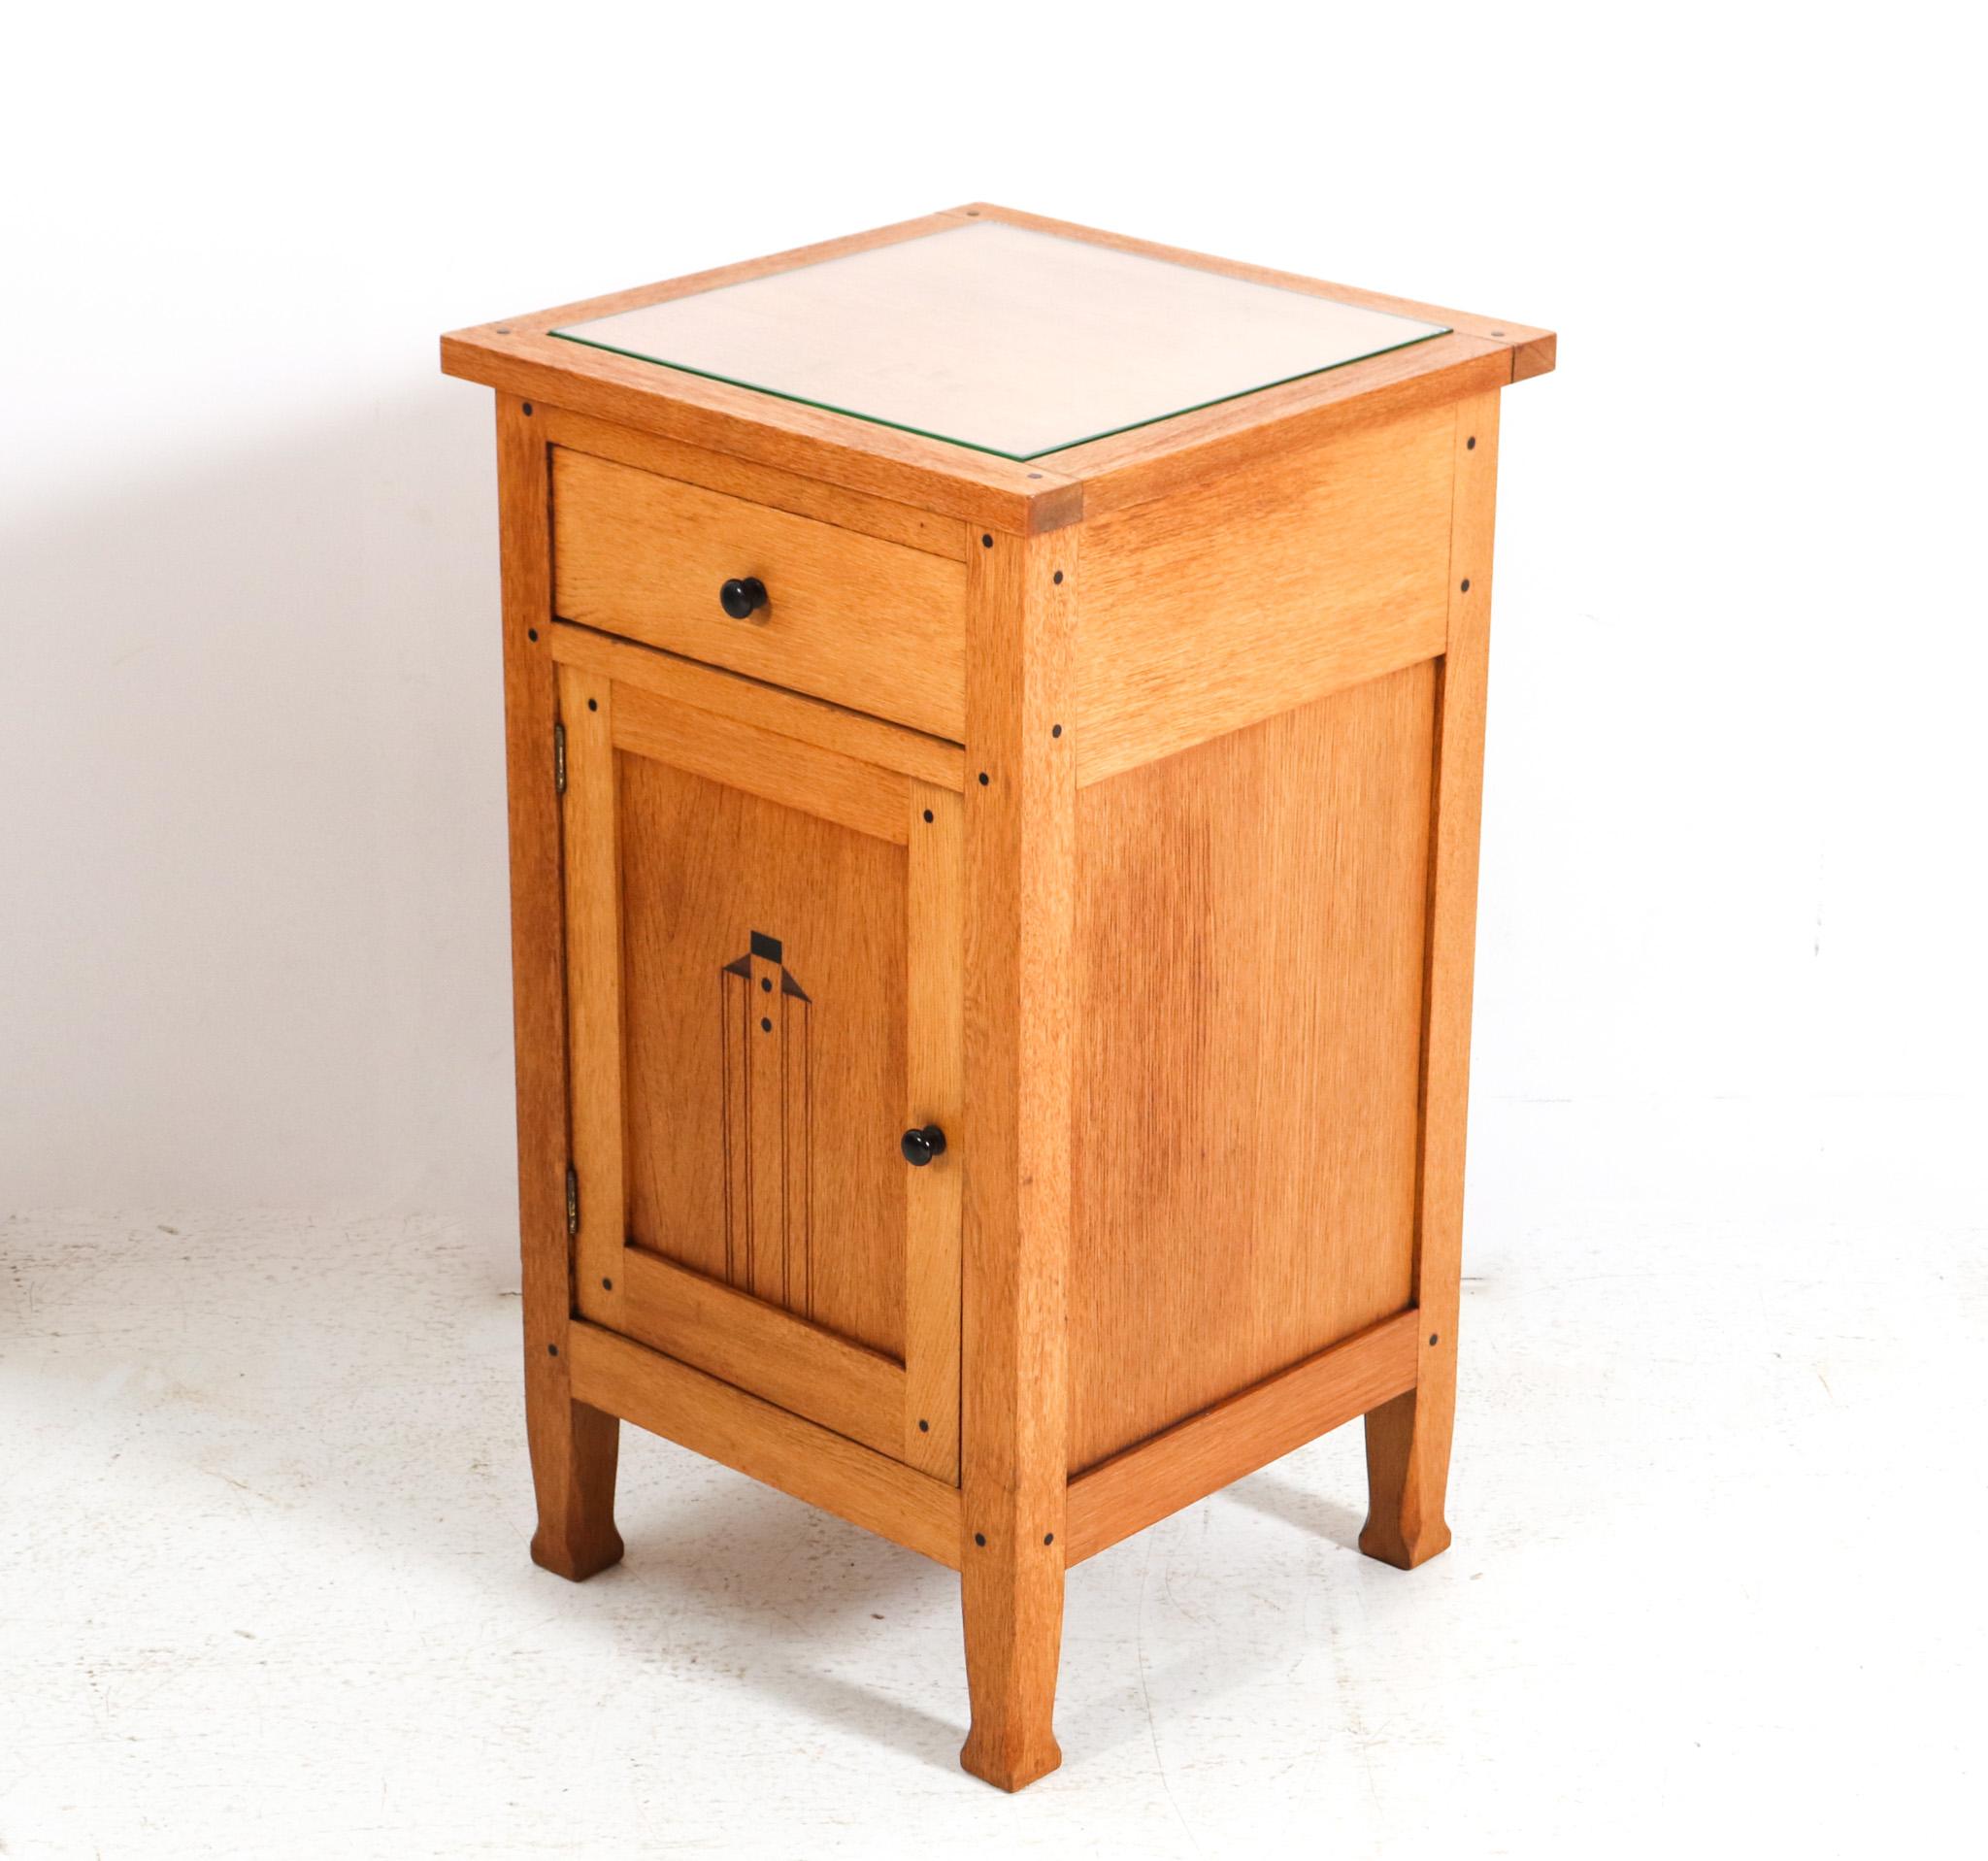 Oak Arts & Crafts Art Nouveau Nightstand  by Jac. van den Bosch, 1904 In Good Condition For Sale In Amsterdam, NL